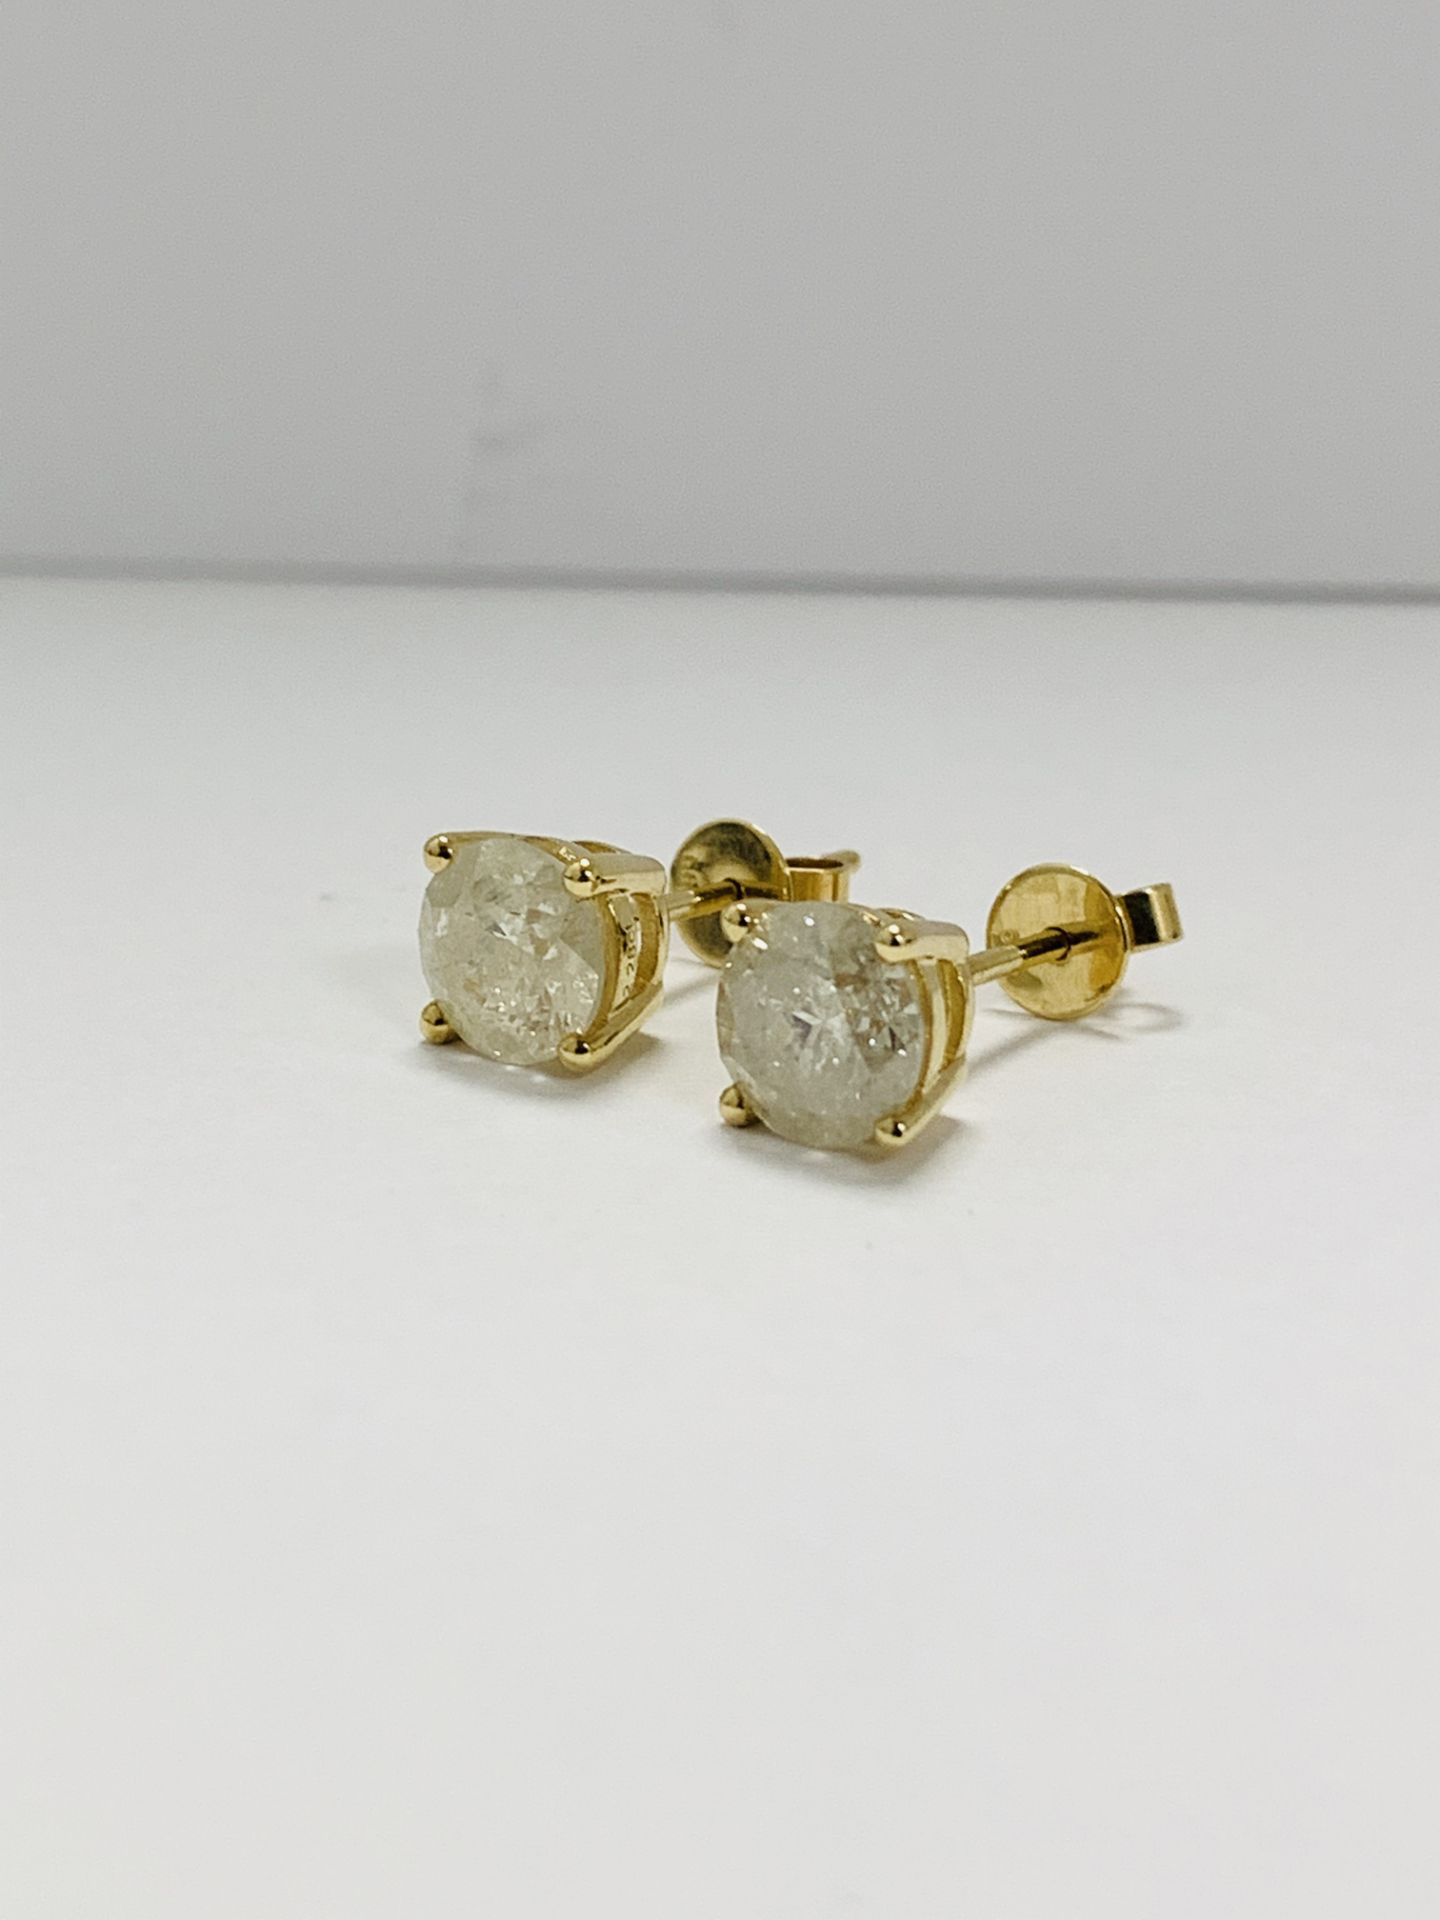 14K Yellow Gold Pair Of Earrings - Image 2 of 6